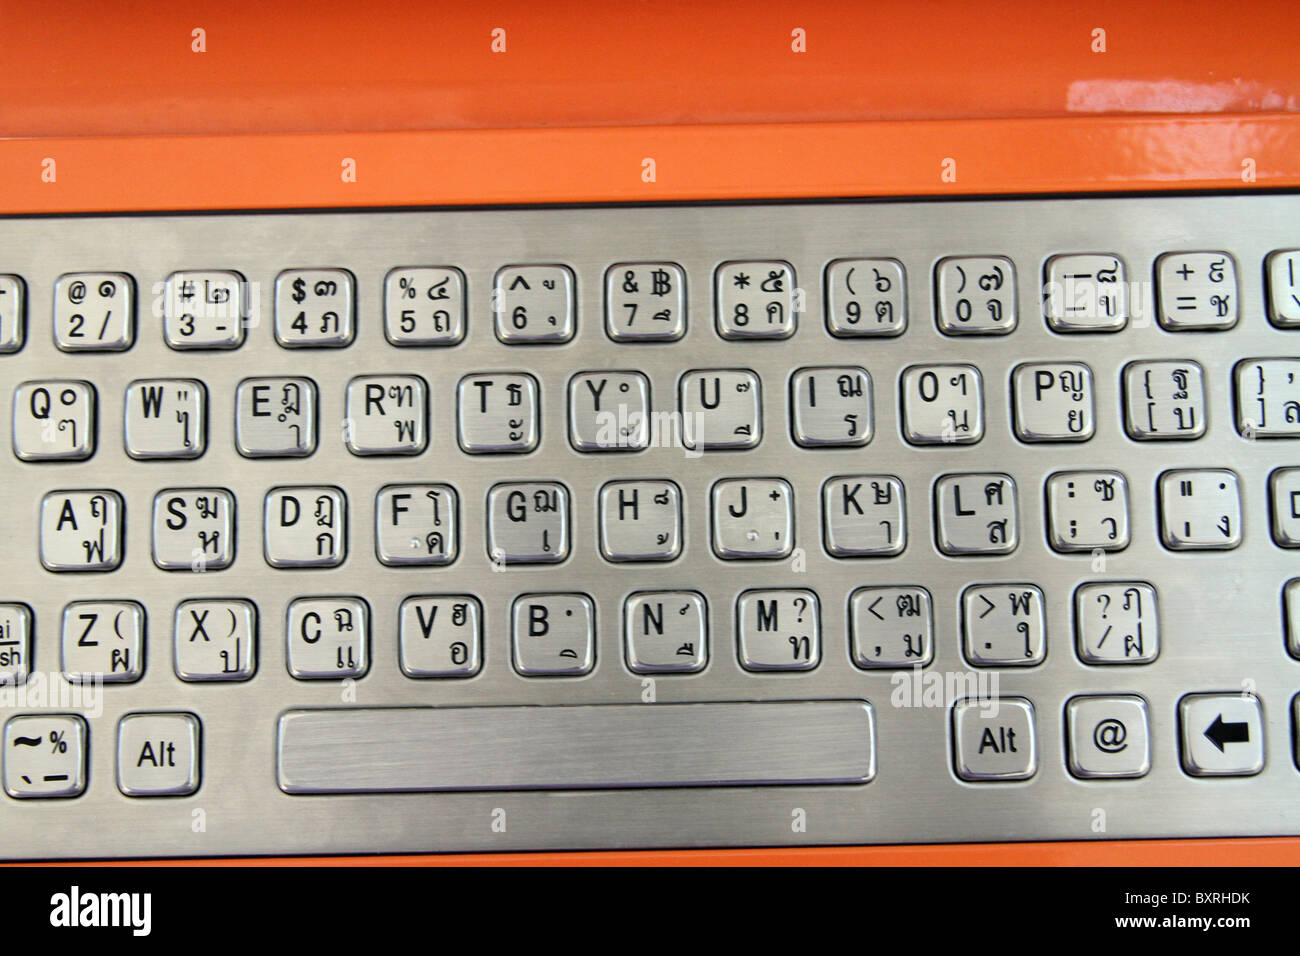 Thai qwerty computer keyboard with Thai writing and characters in Bangkok,  Thailand Stock Photo - Alamy